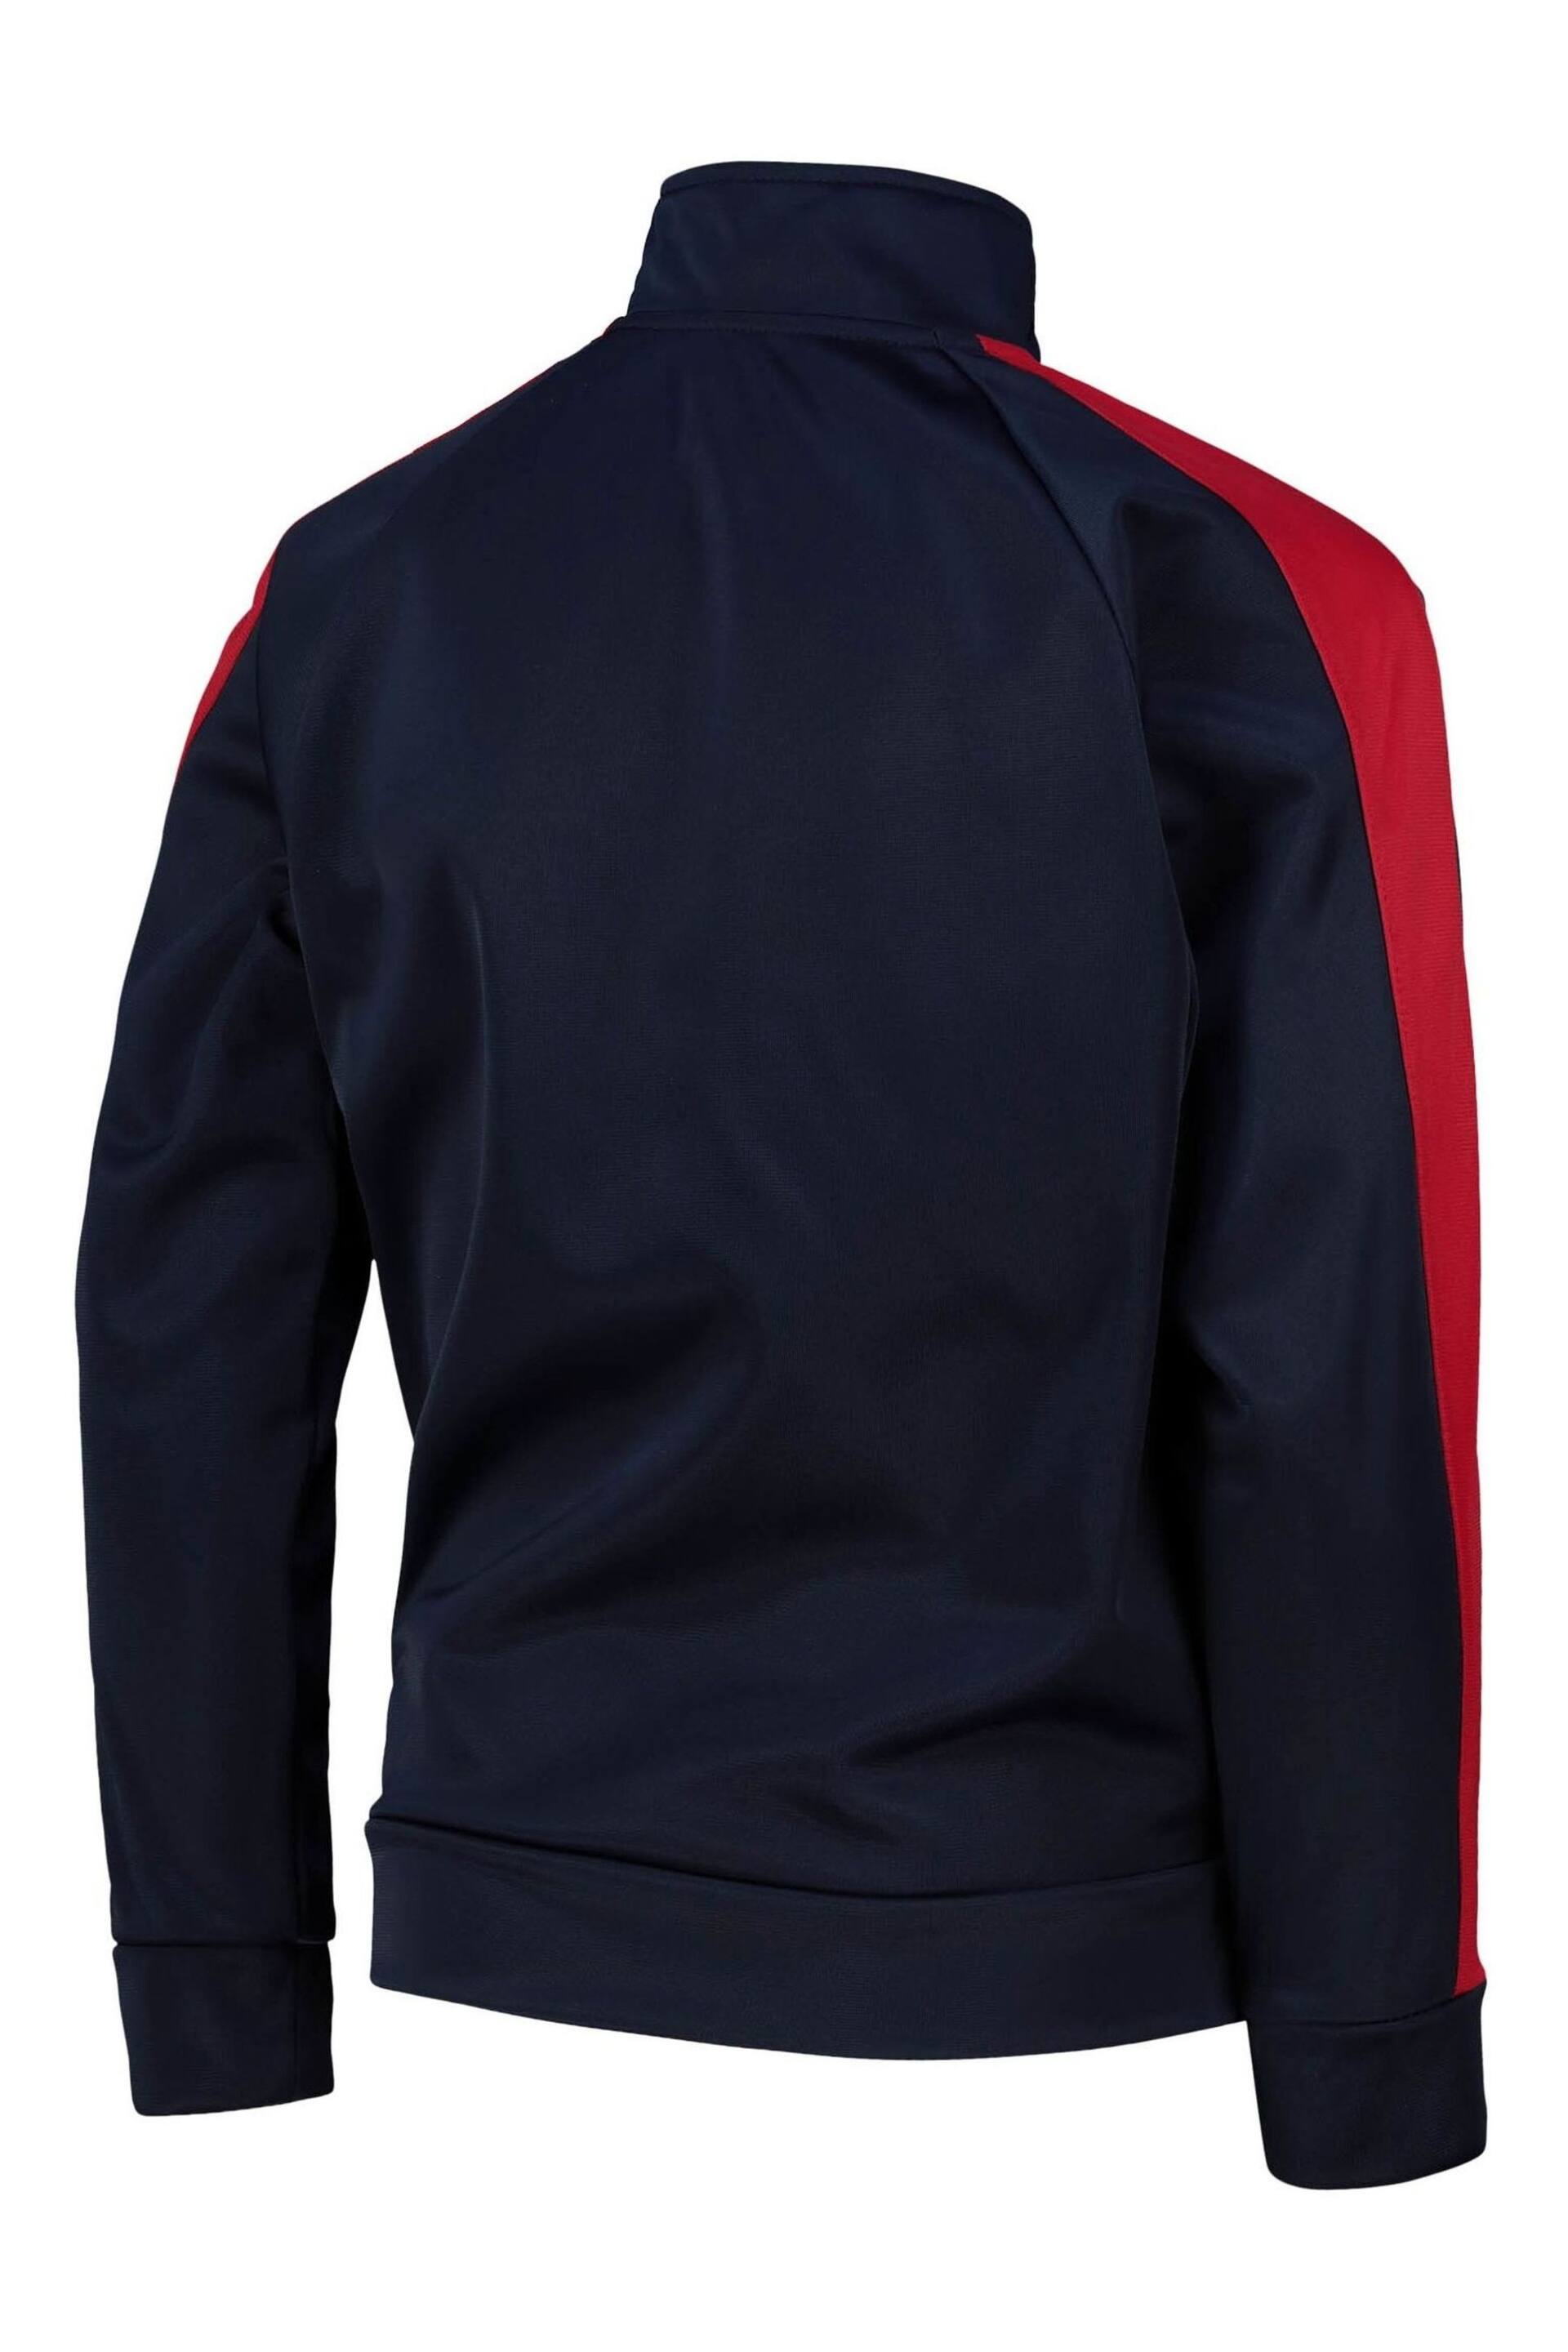 adidas Blue Arsenal Tracksuit Top - Image 3 of 3